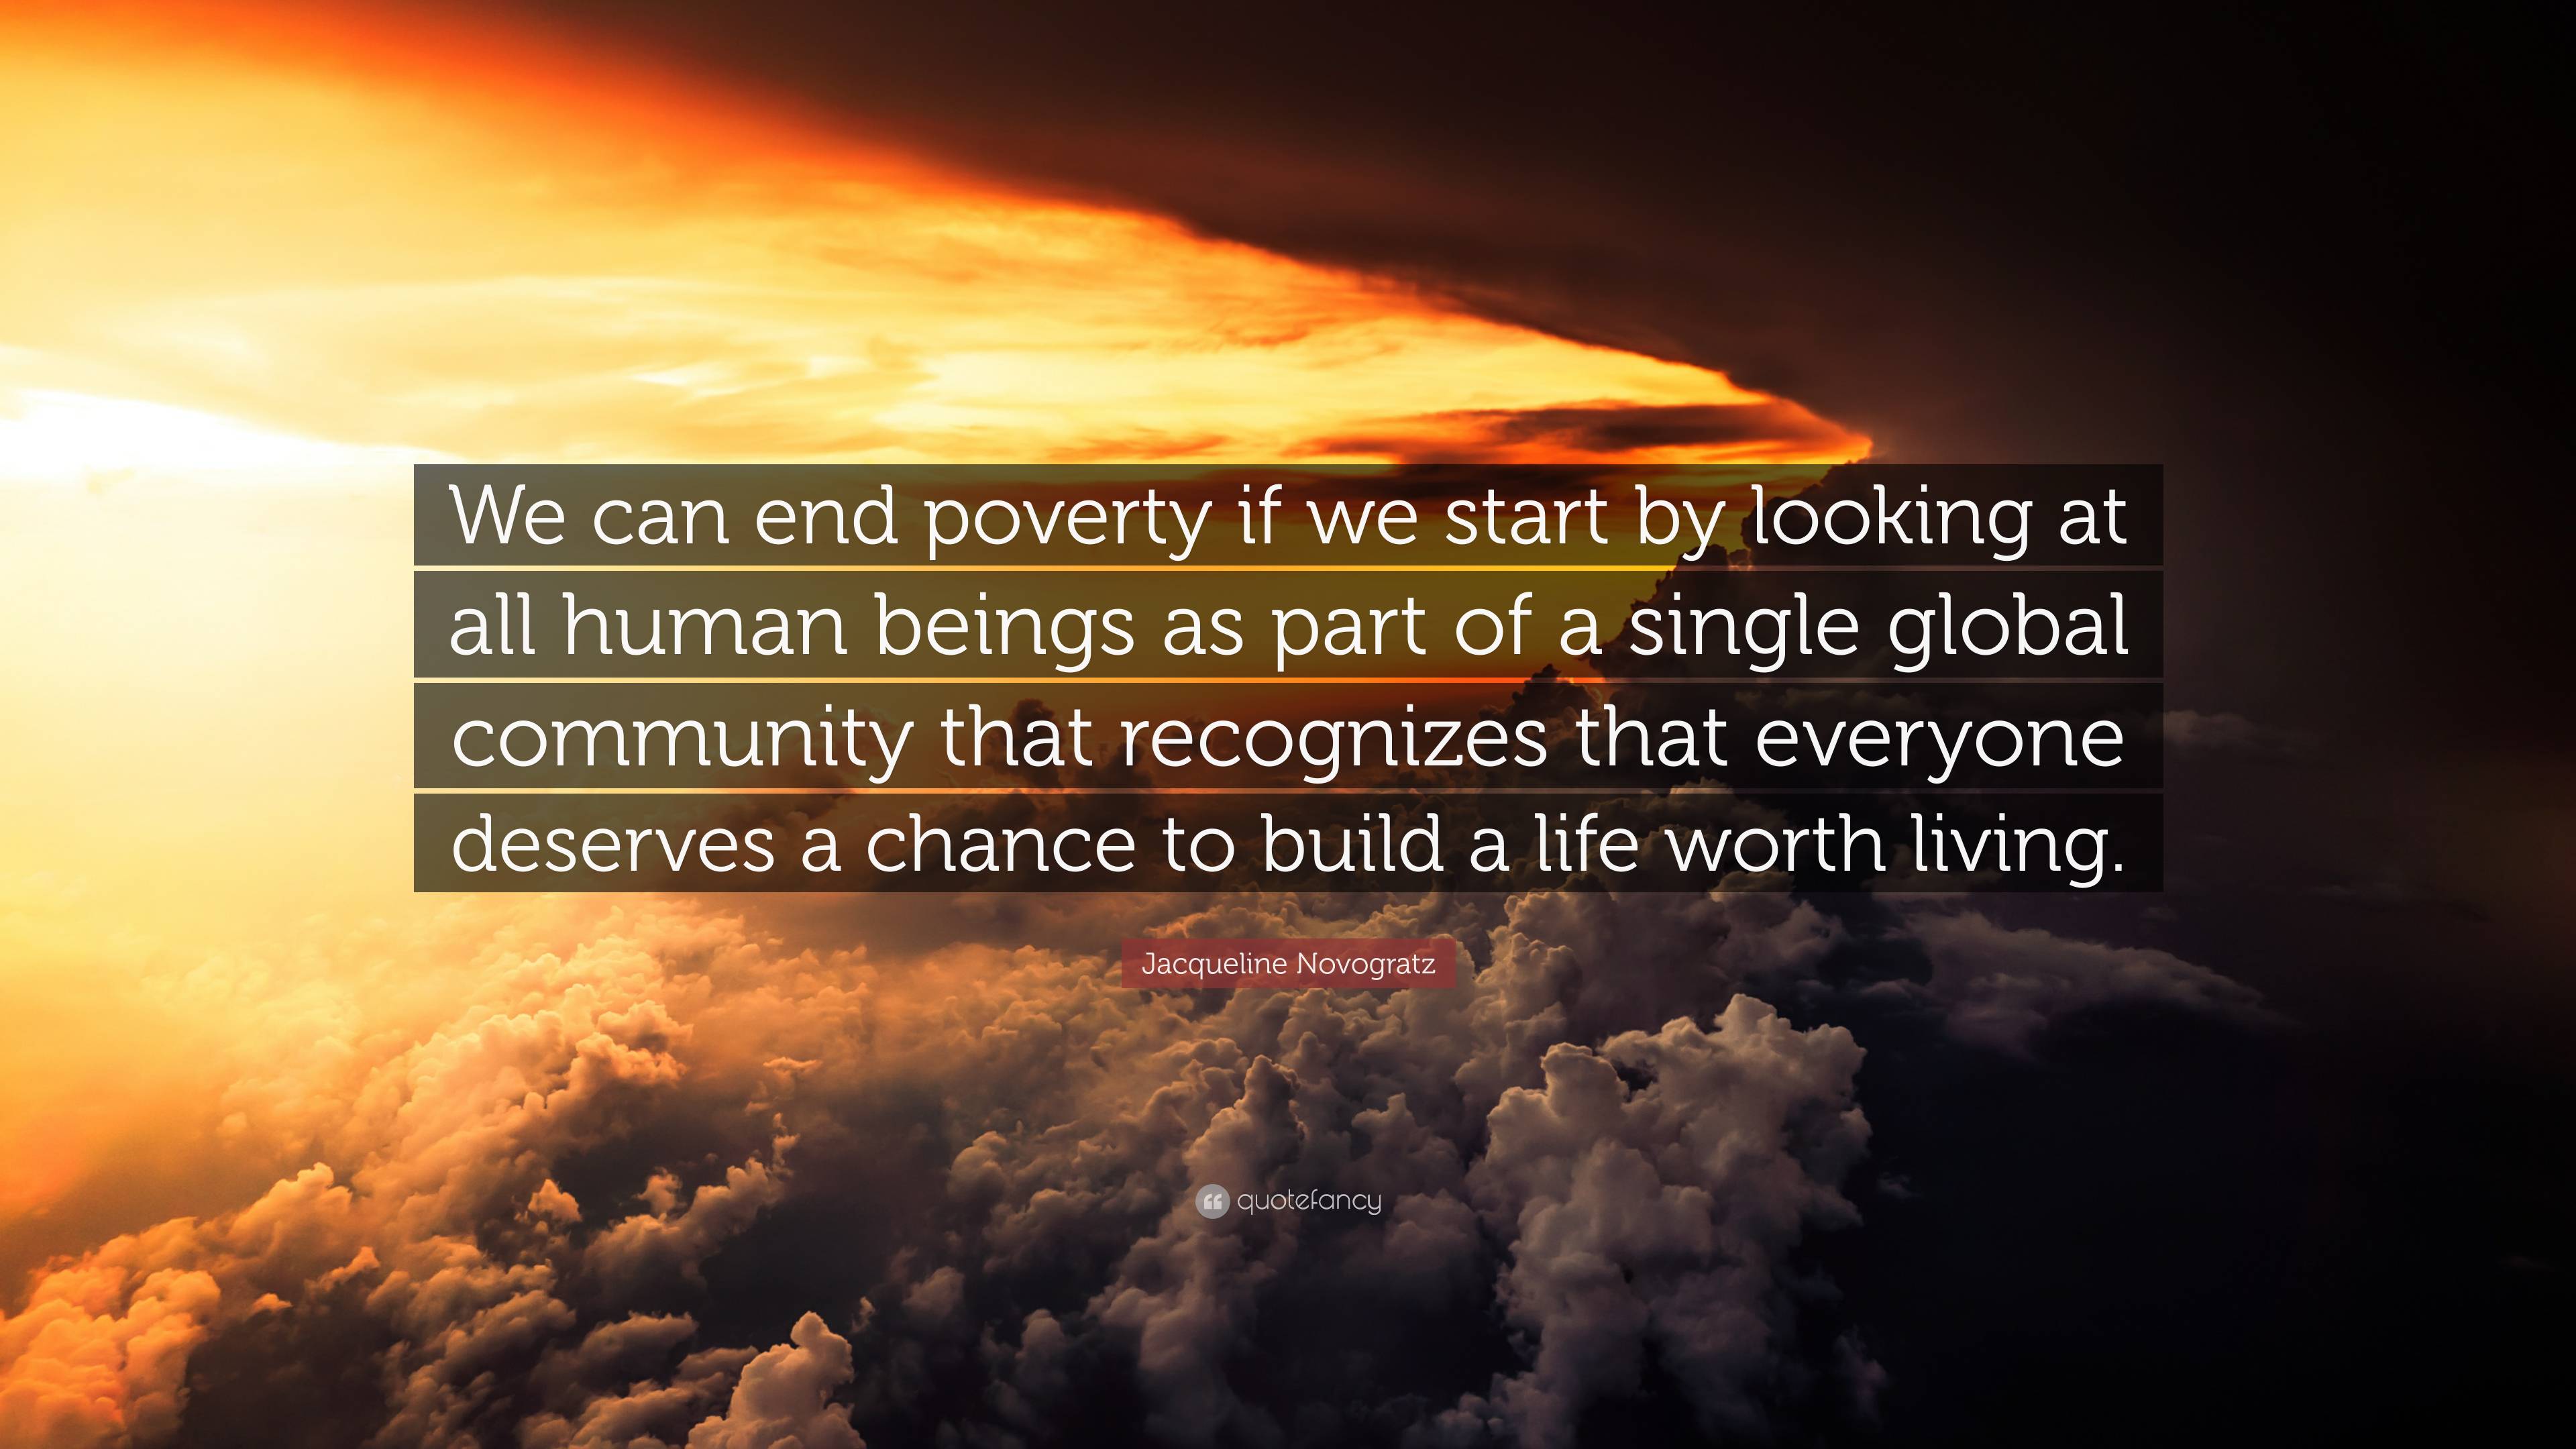 Jacqueline Novogratz Quote: “We can end poverty if we start by looking ...